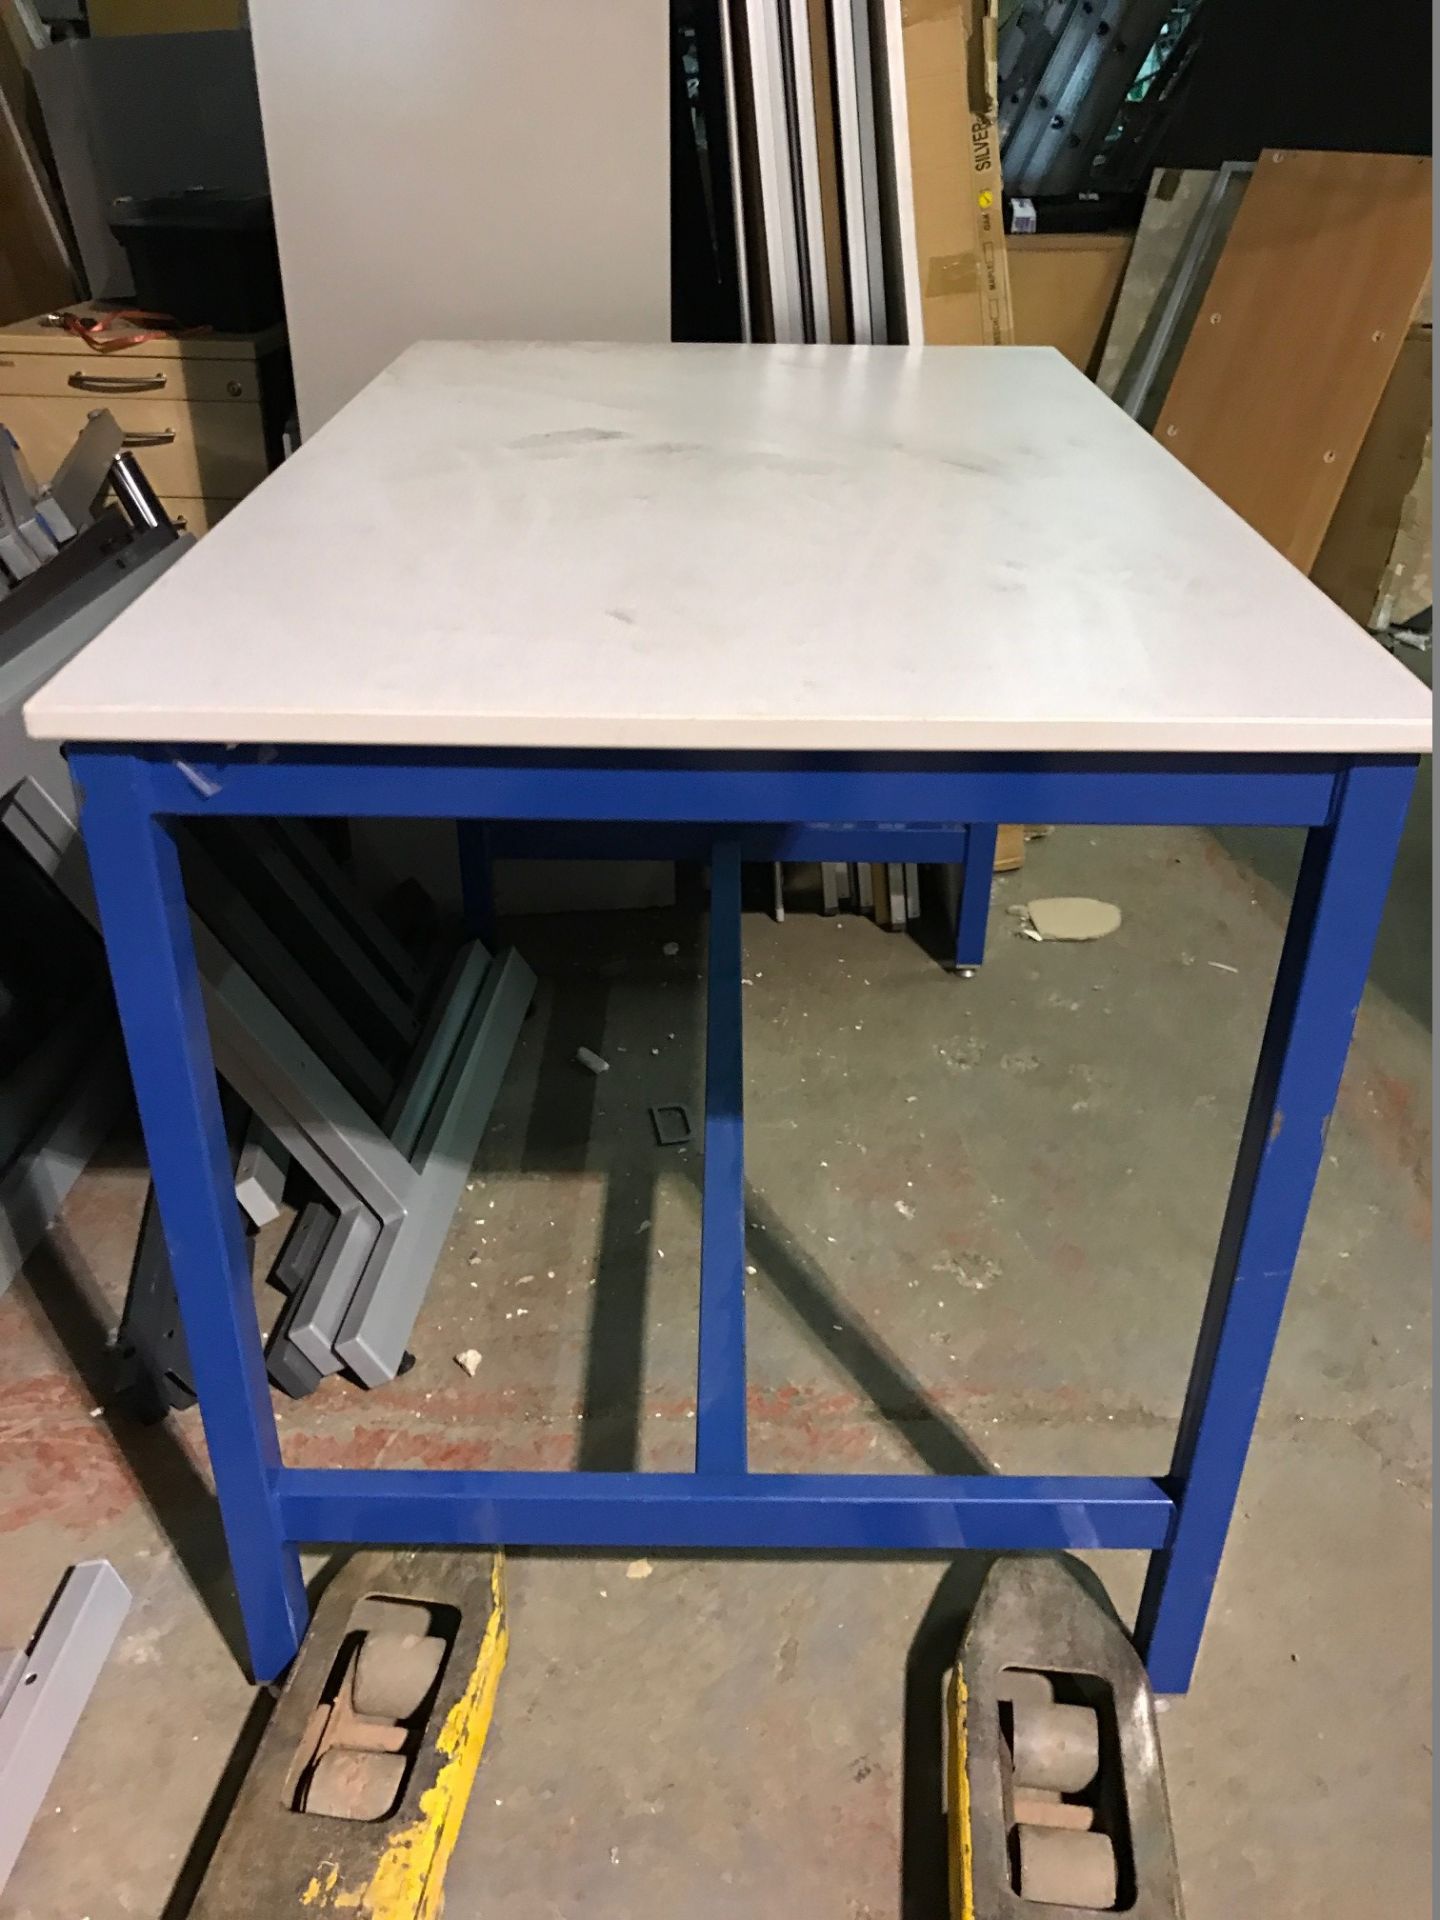 Solid Frame Work Bench L1200xD750xH840mm - Image 2 of 2